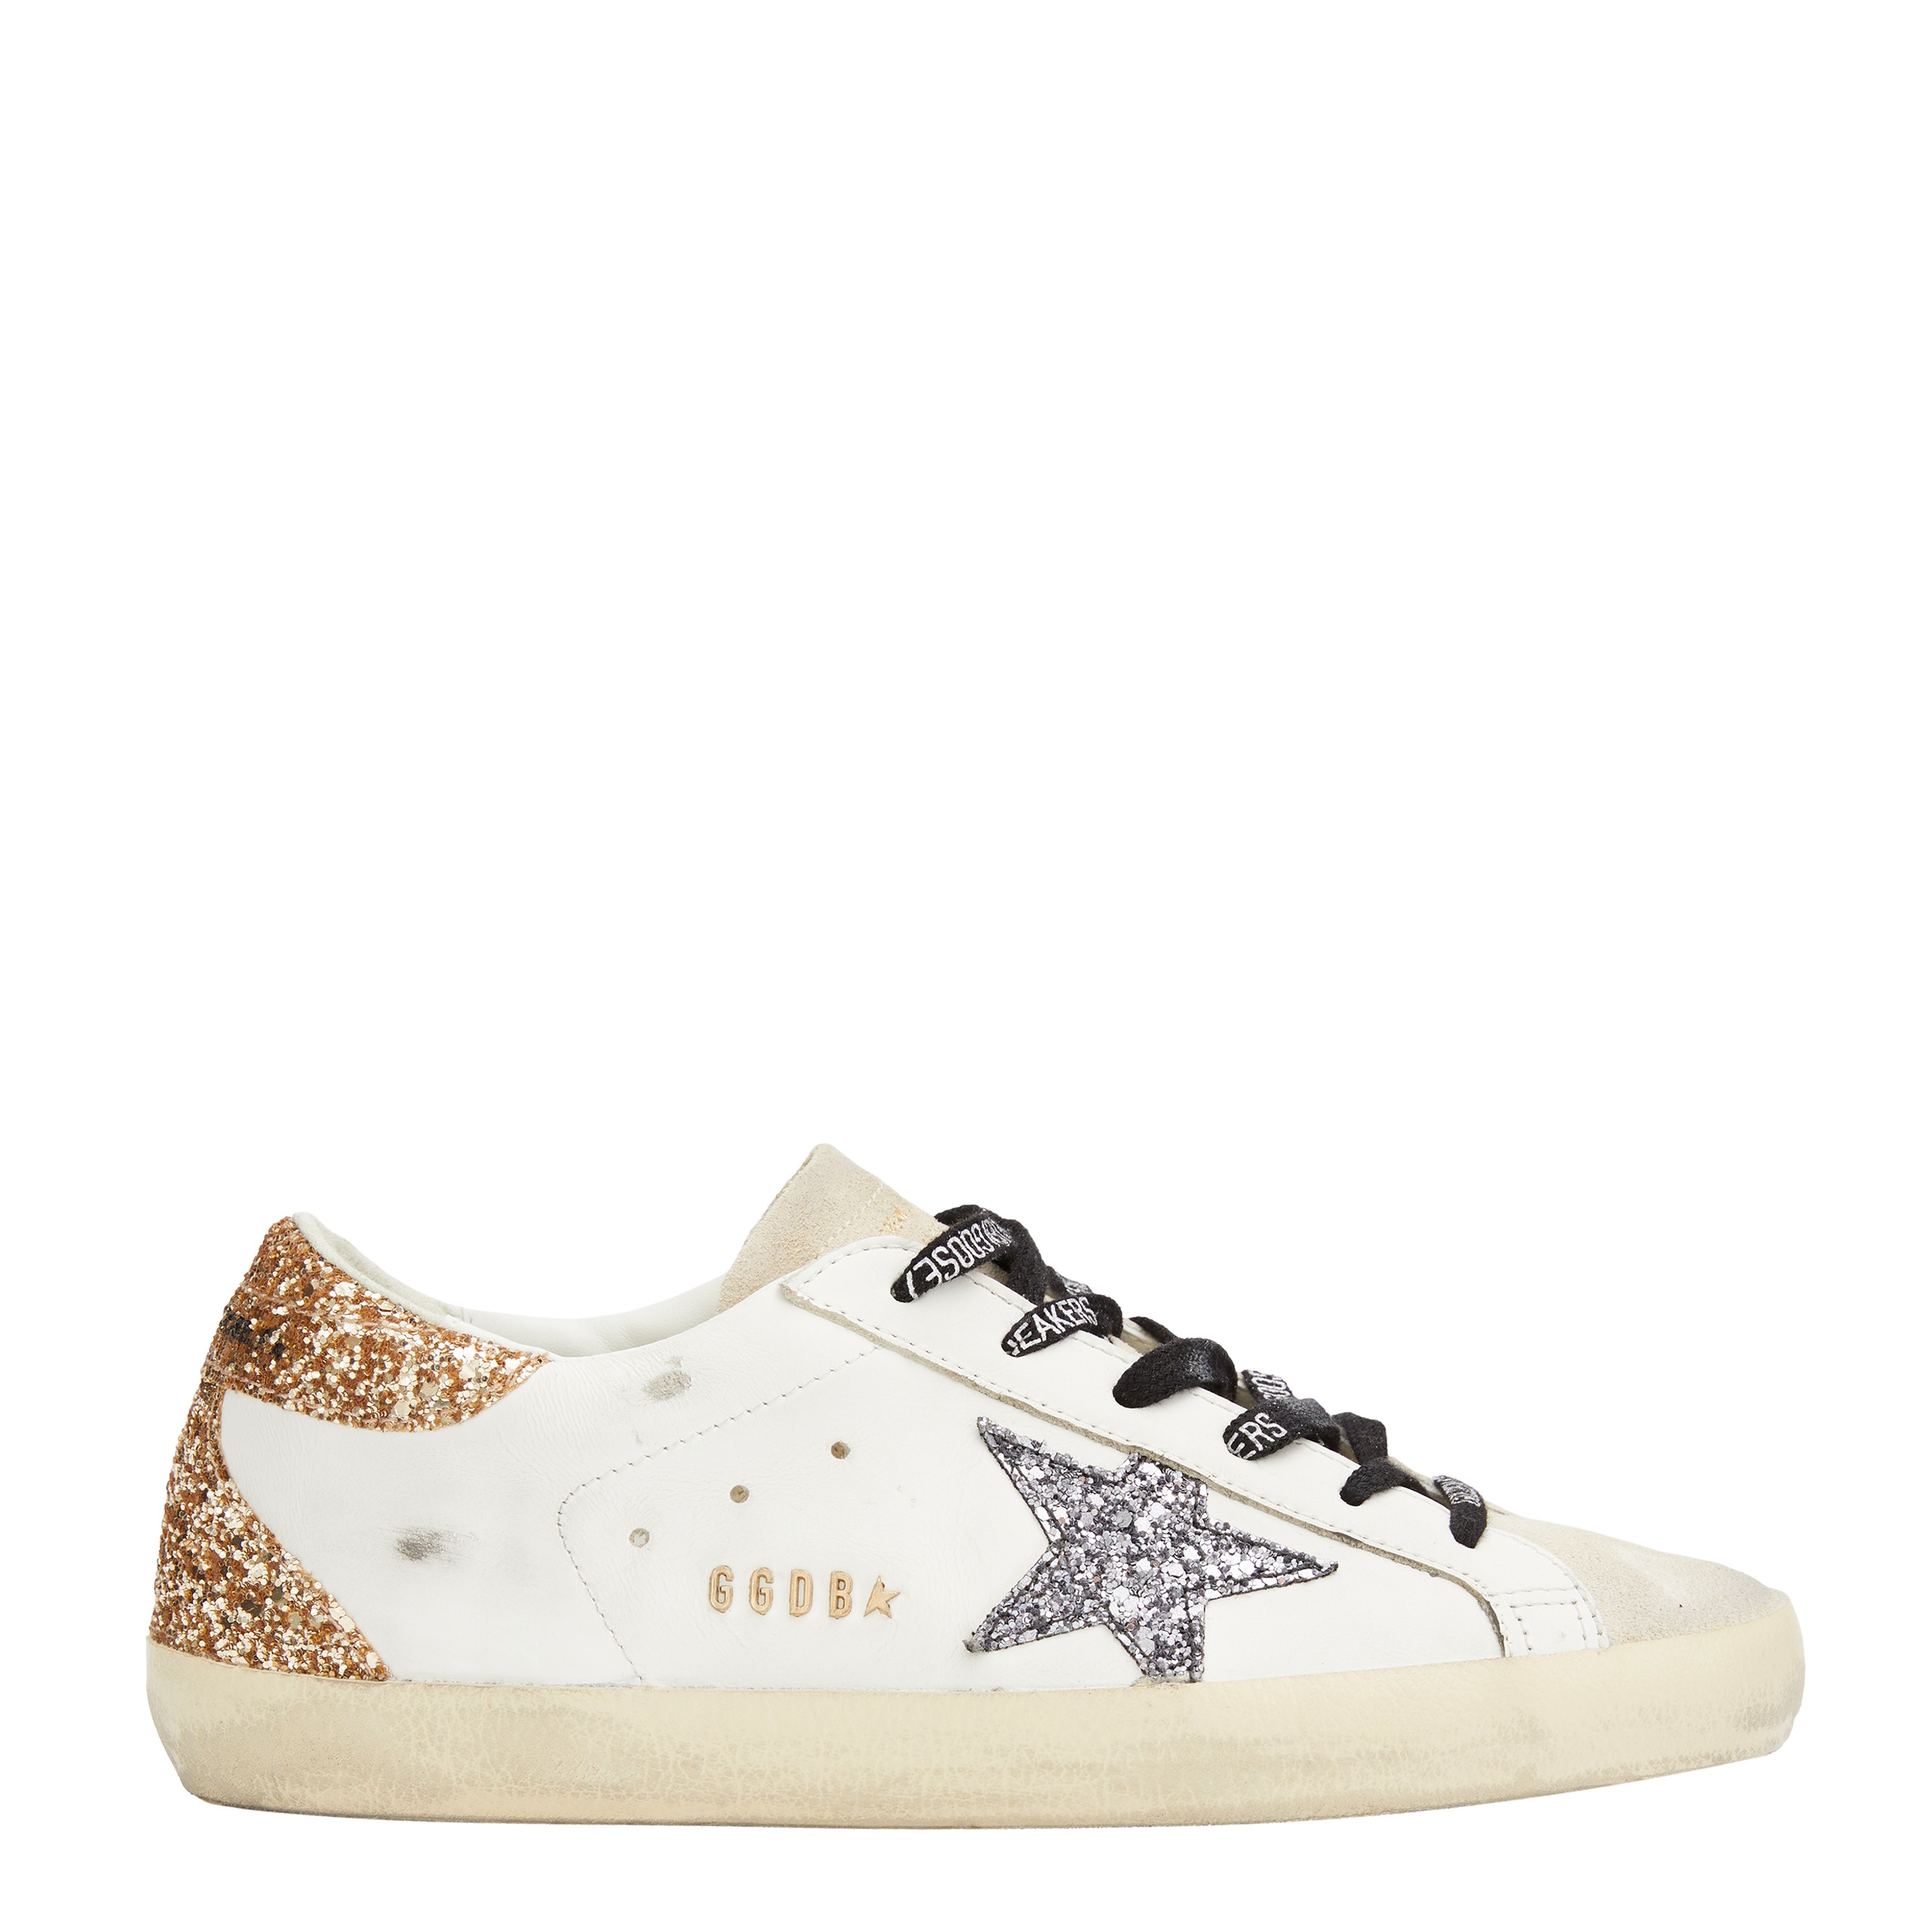 None Golden Goose Deluxe Brand GWF00102/F005358/82532, размер 36;41